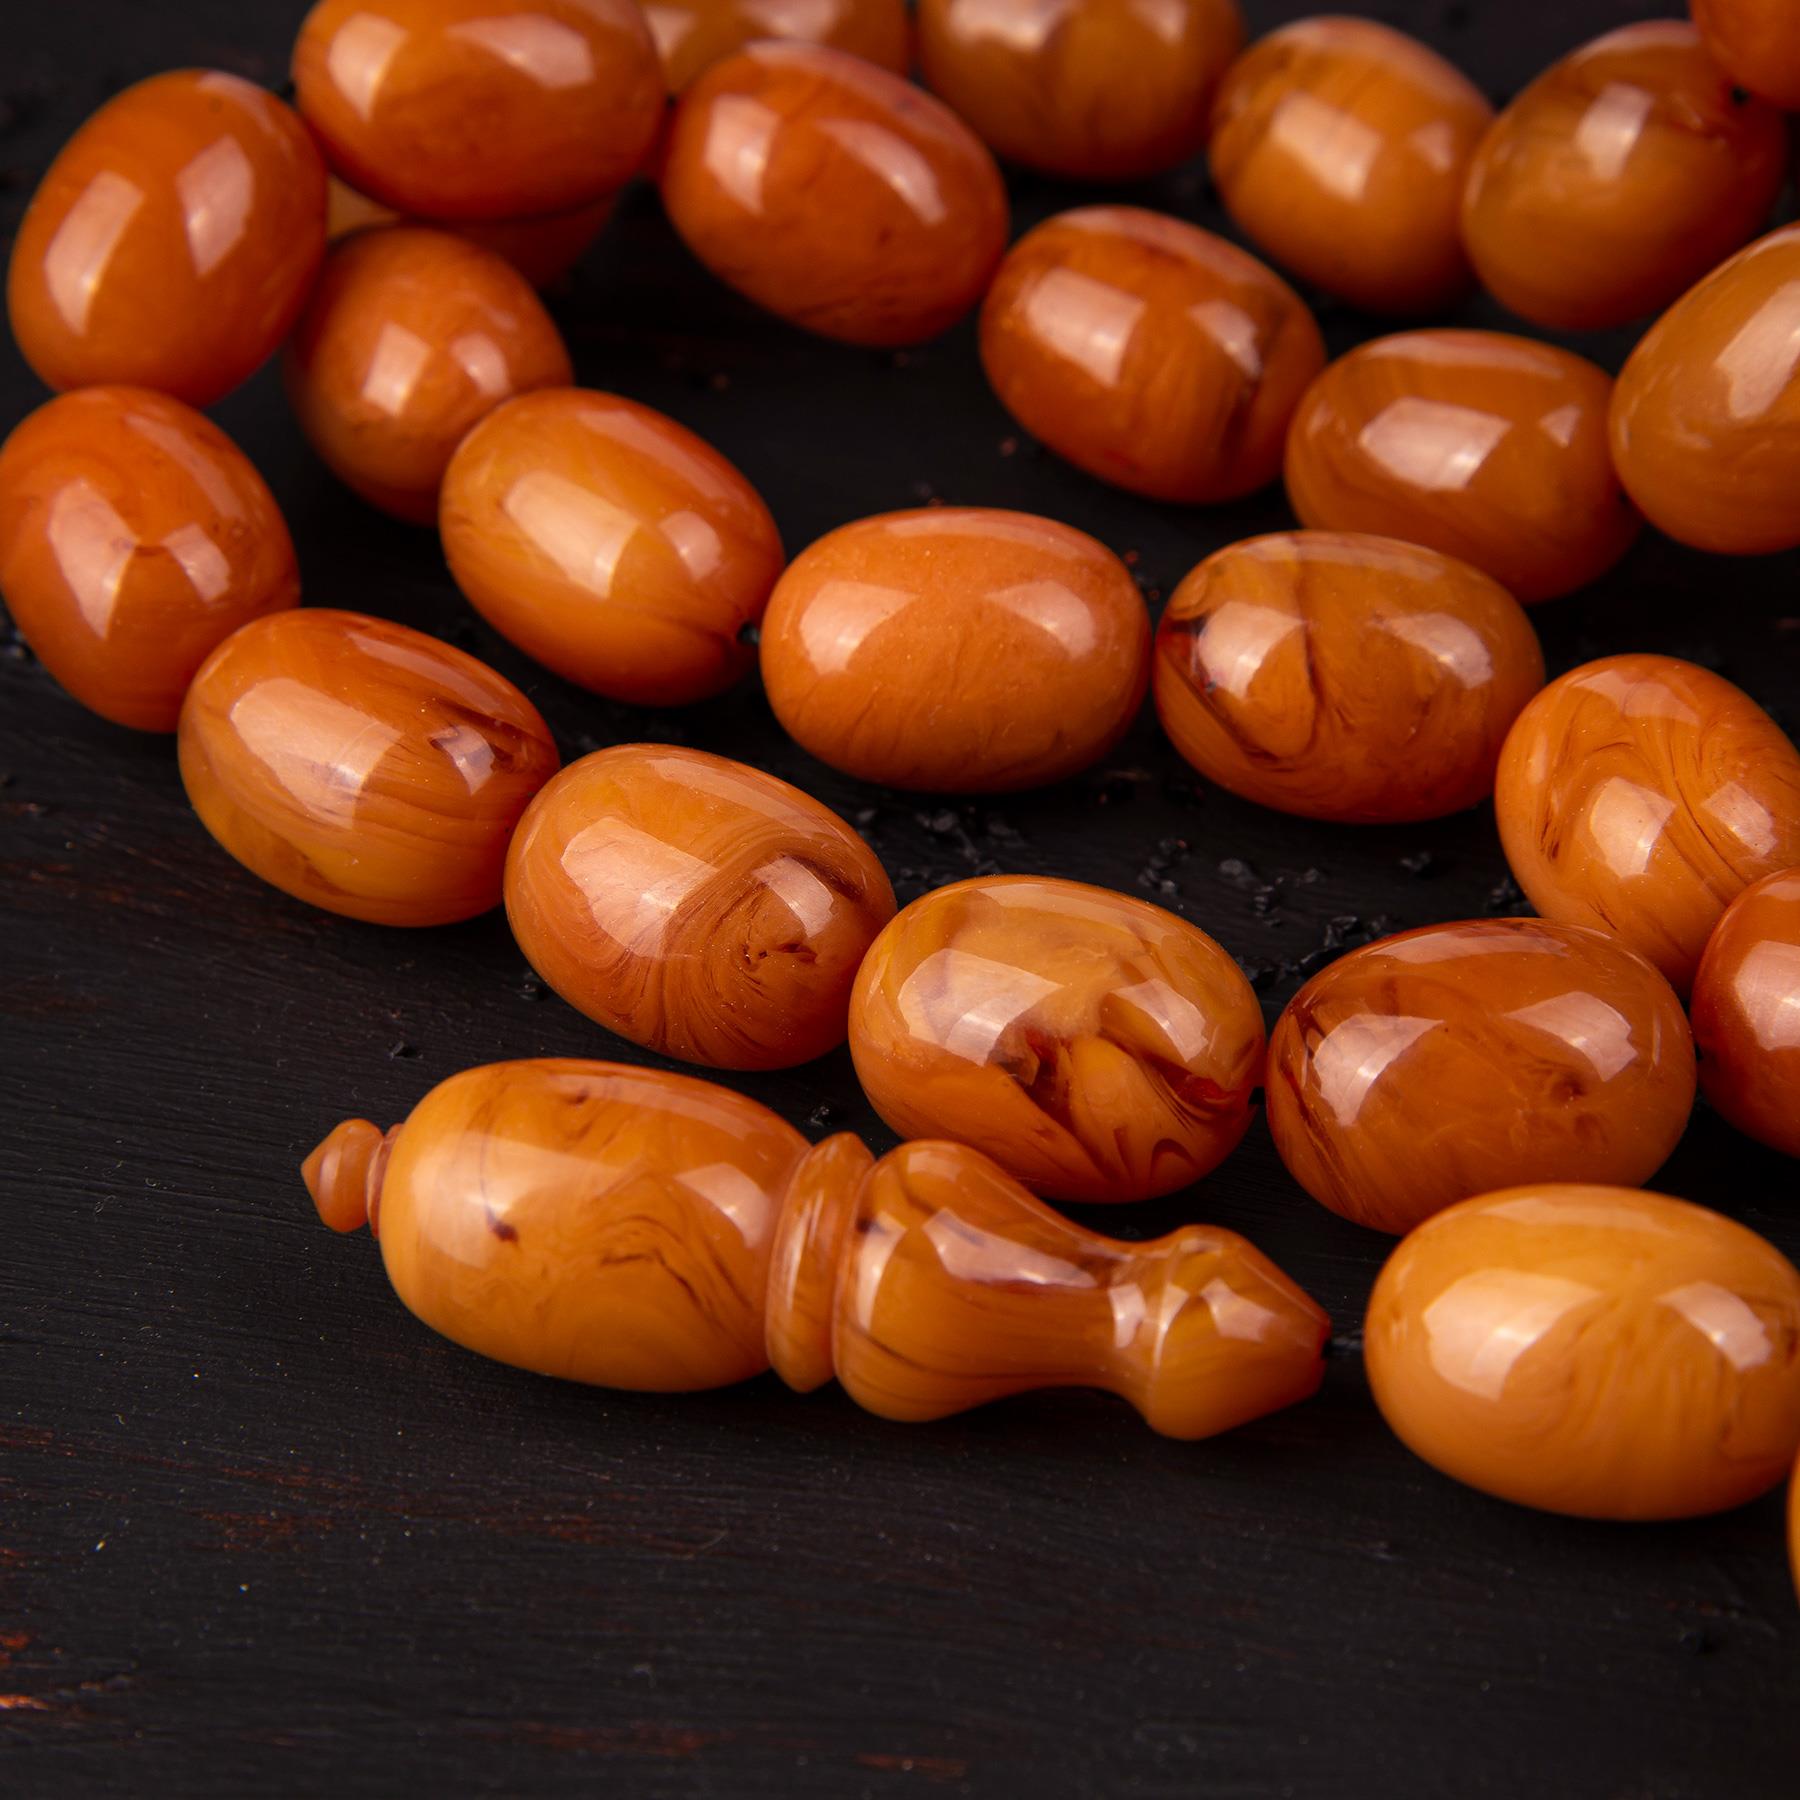 Ve Tesbih Systematic Pressed Amber Large Size Prayer Beads 2